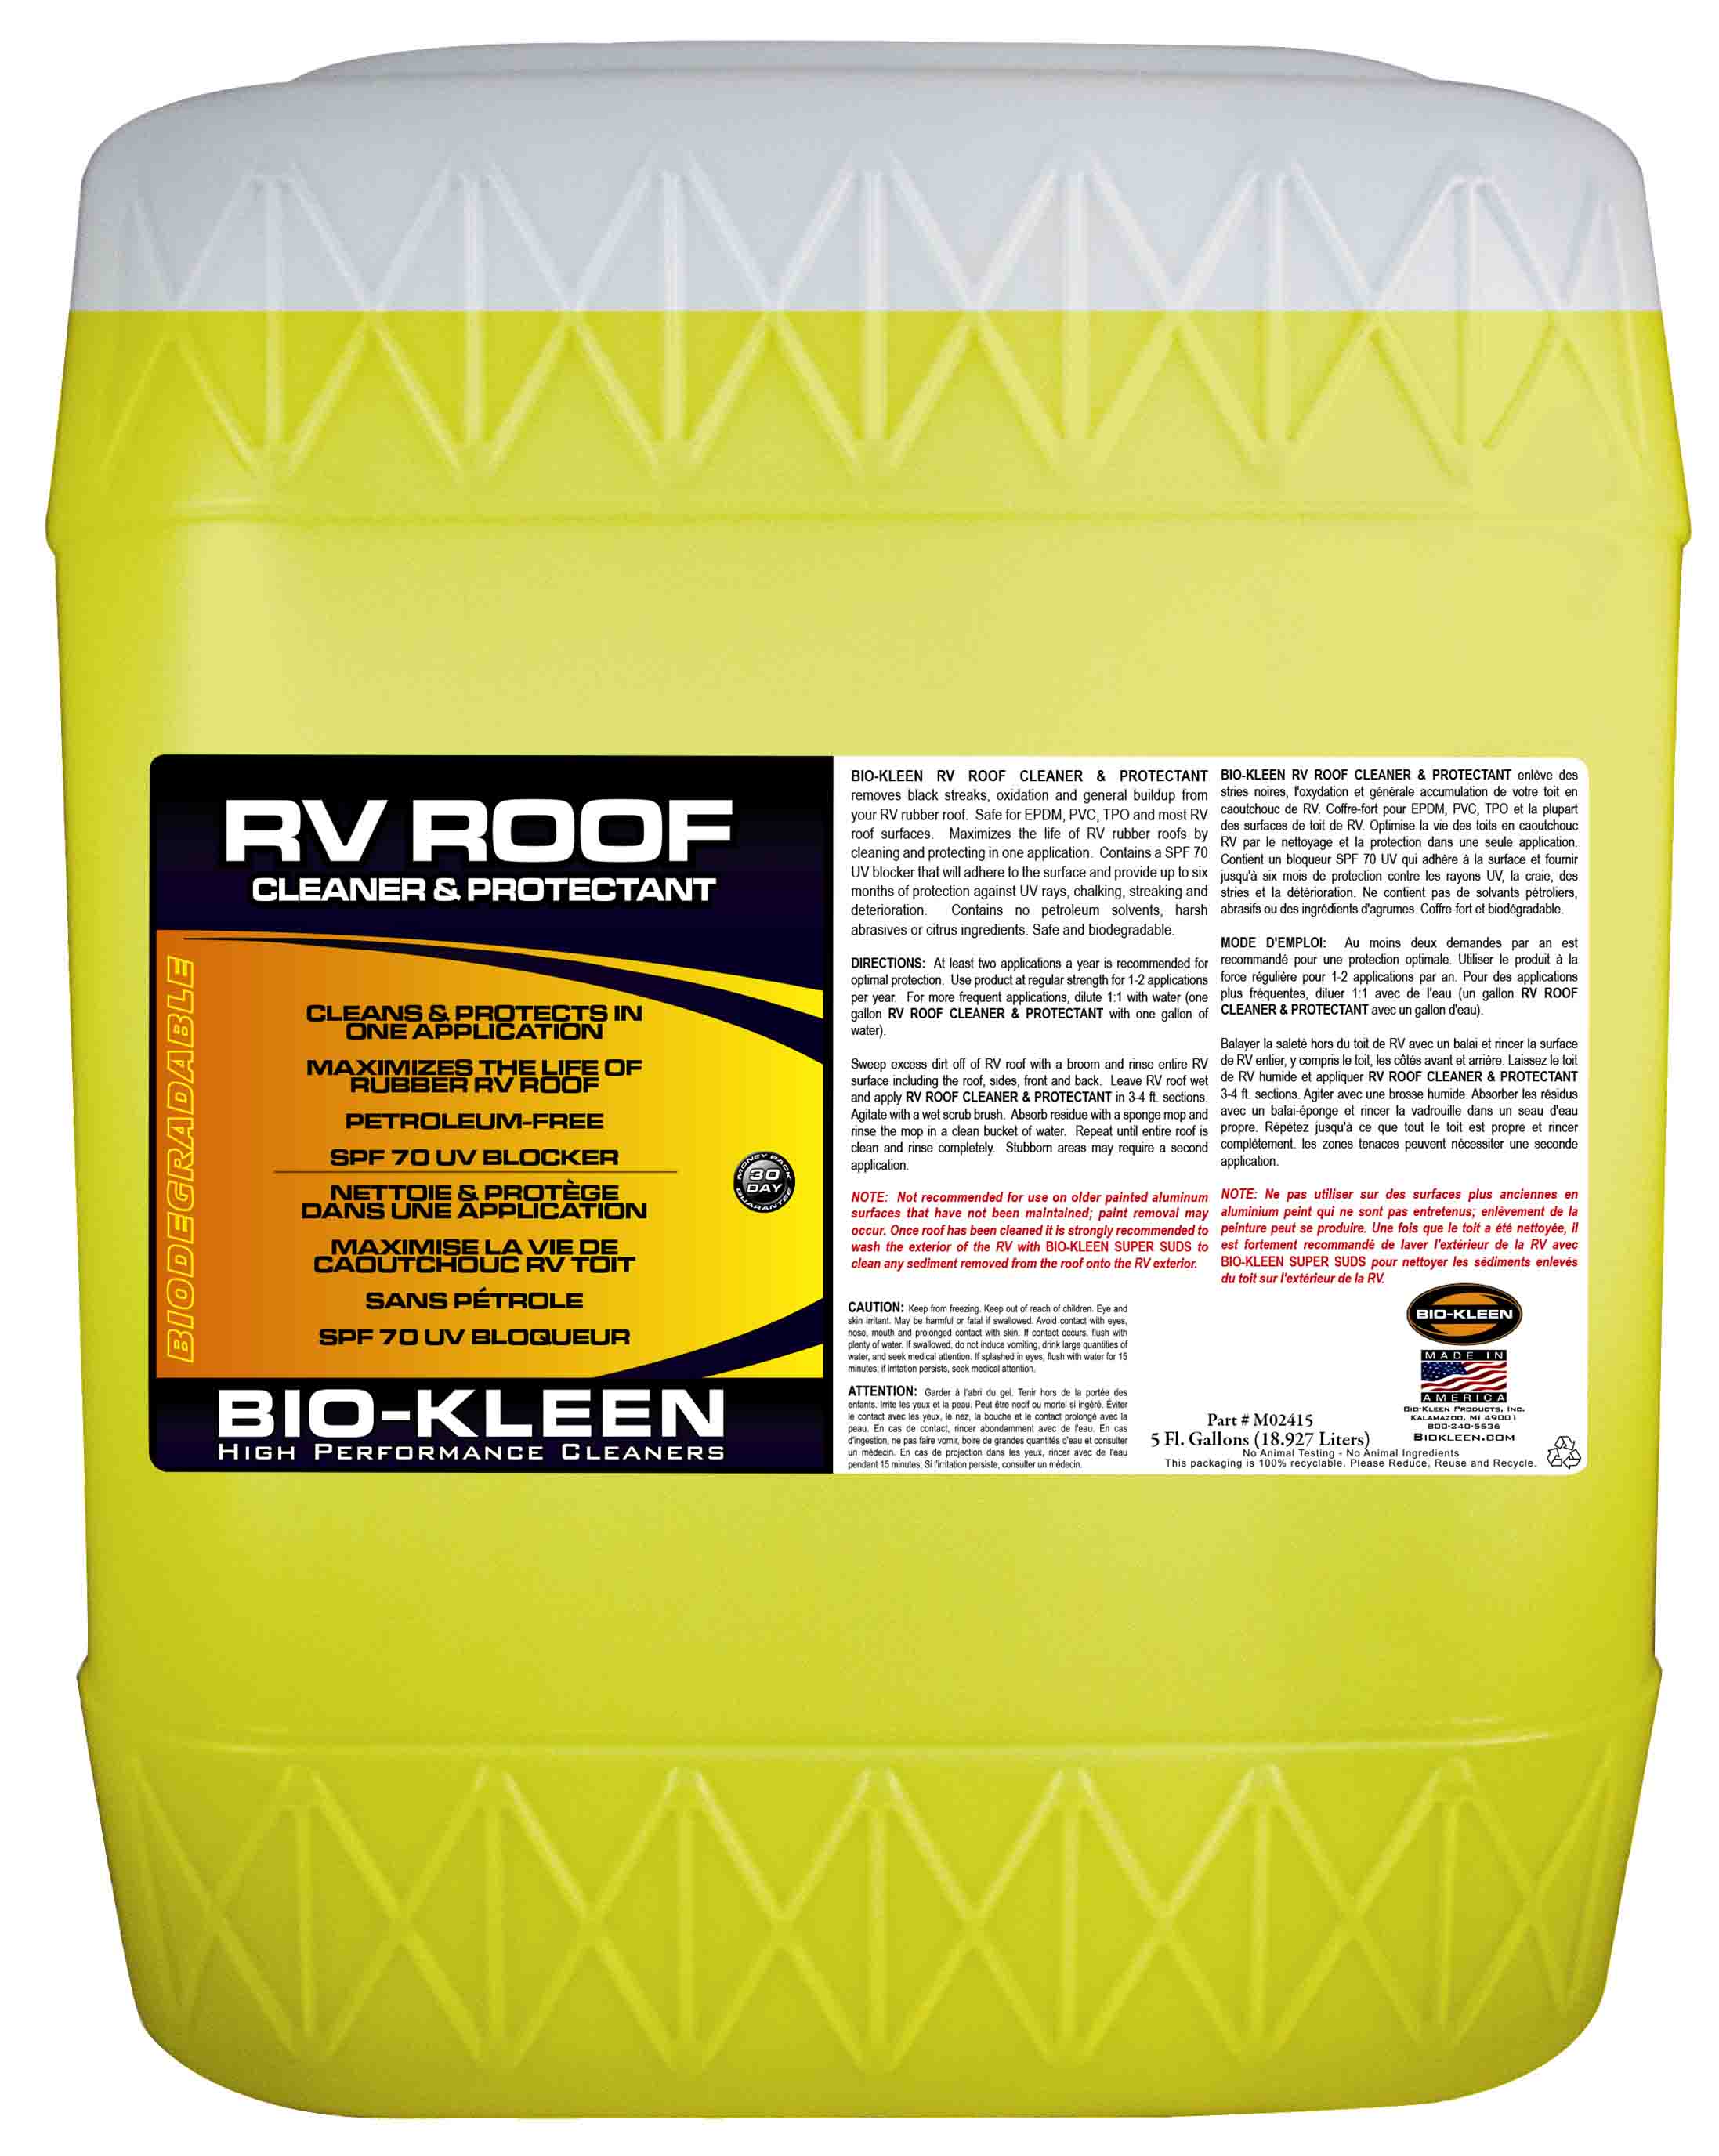 Bio-Kleen M02415 RV Roof Cleaner & Protectant - 5 Gallon